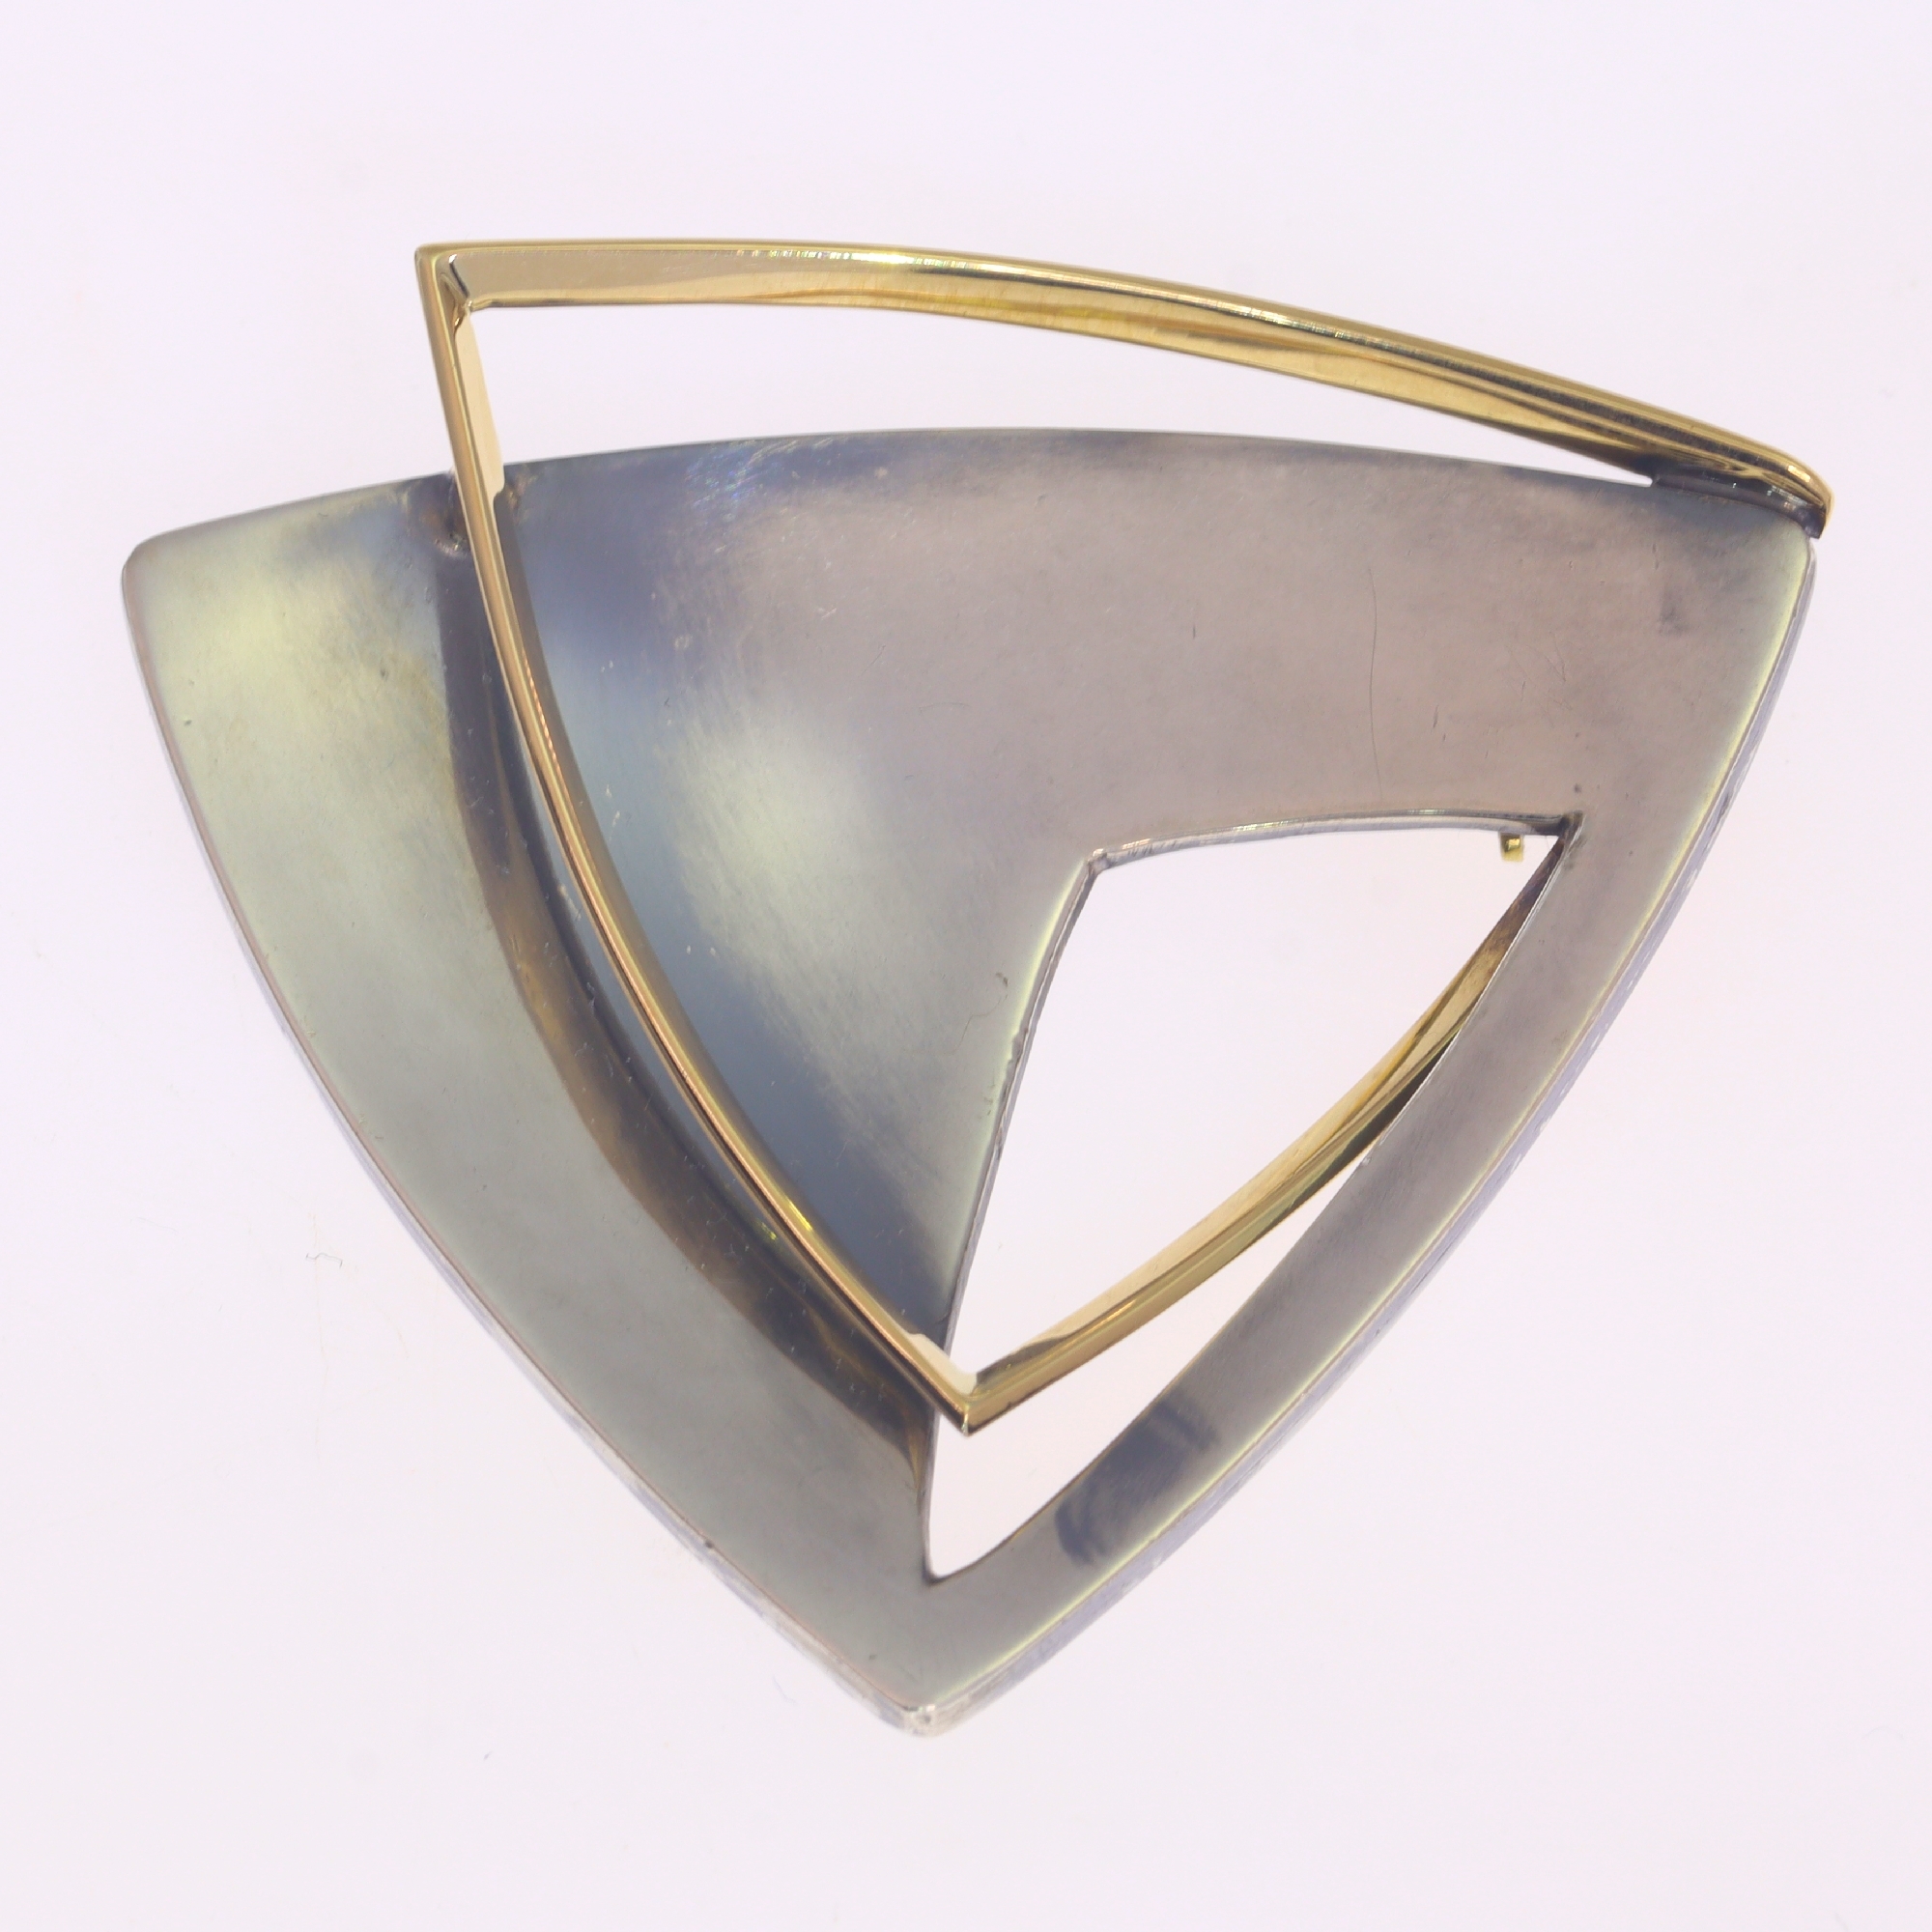 Artist Jewelry by Chris Steenbergen silver and gold brooch